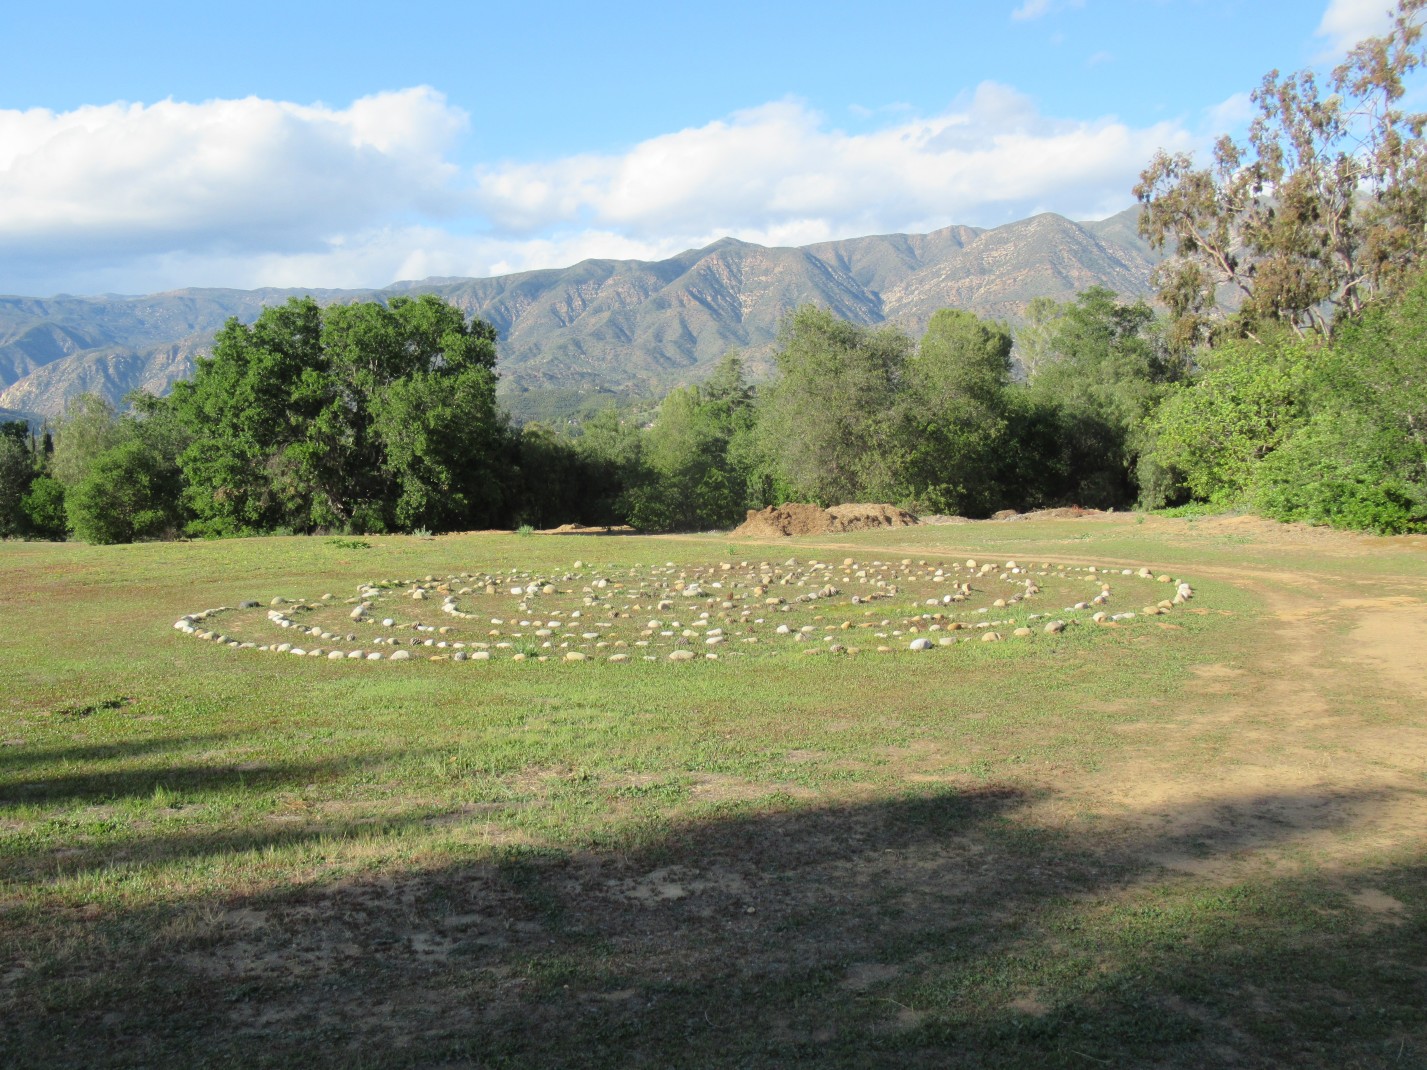 Rocks laid out in a circle for meditation practice on green grass surrounded by trees with mountains in the background and a blue sky